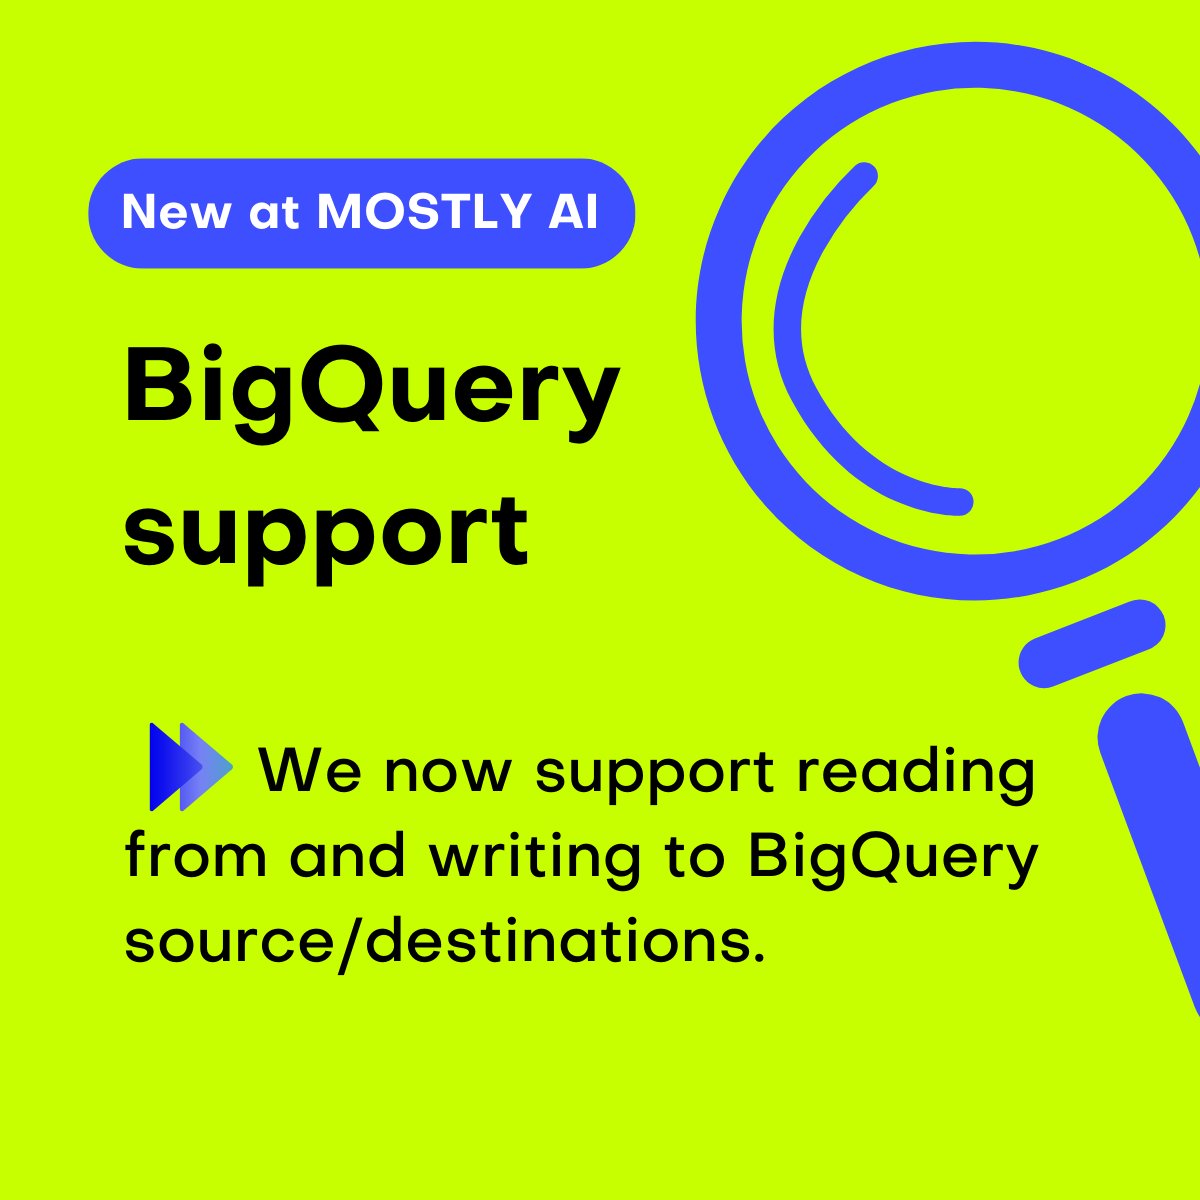 📢 We're thrilled to announce that MOSTLY AI now supports reading from and writing to @bigquery source/destinations. Learn how you can seamlessly integrate your data with BigQuery and unlock new possibilities for analysis and insights. 👉 shorturl.at/jpKZ6